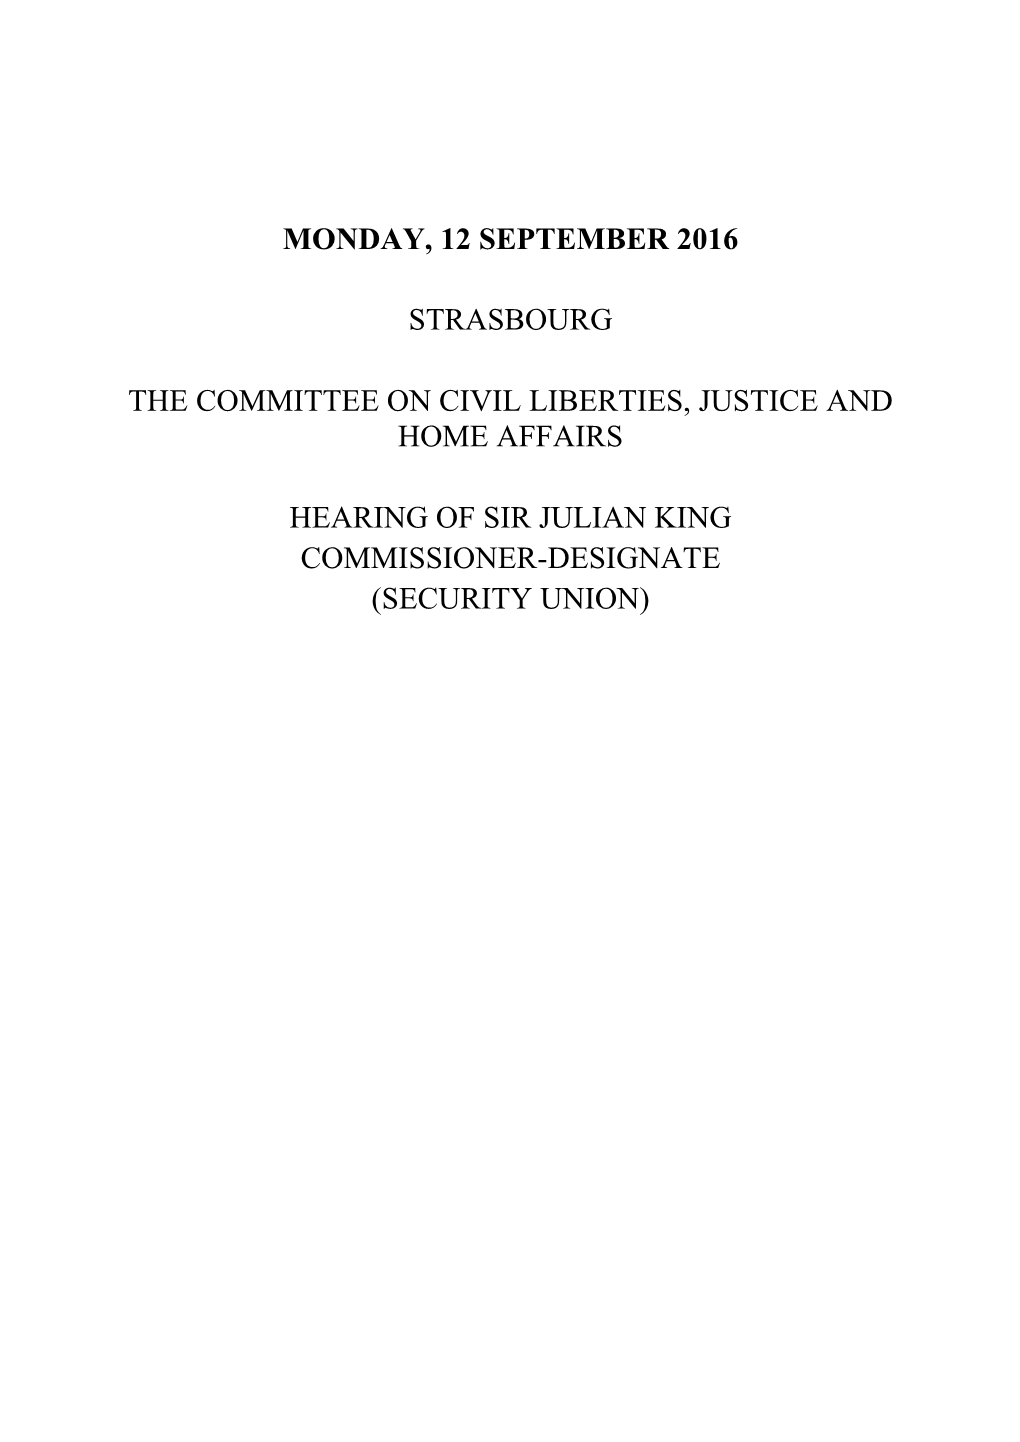 Monday, 12 September 2016 Strasbourg the Committee on Civil Liberties, Justice and Home Affairs Hearing of Sir Julian King Commi